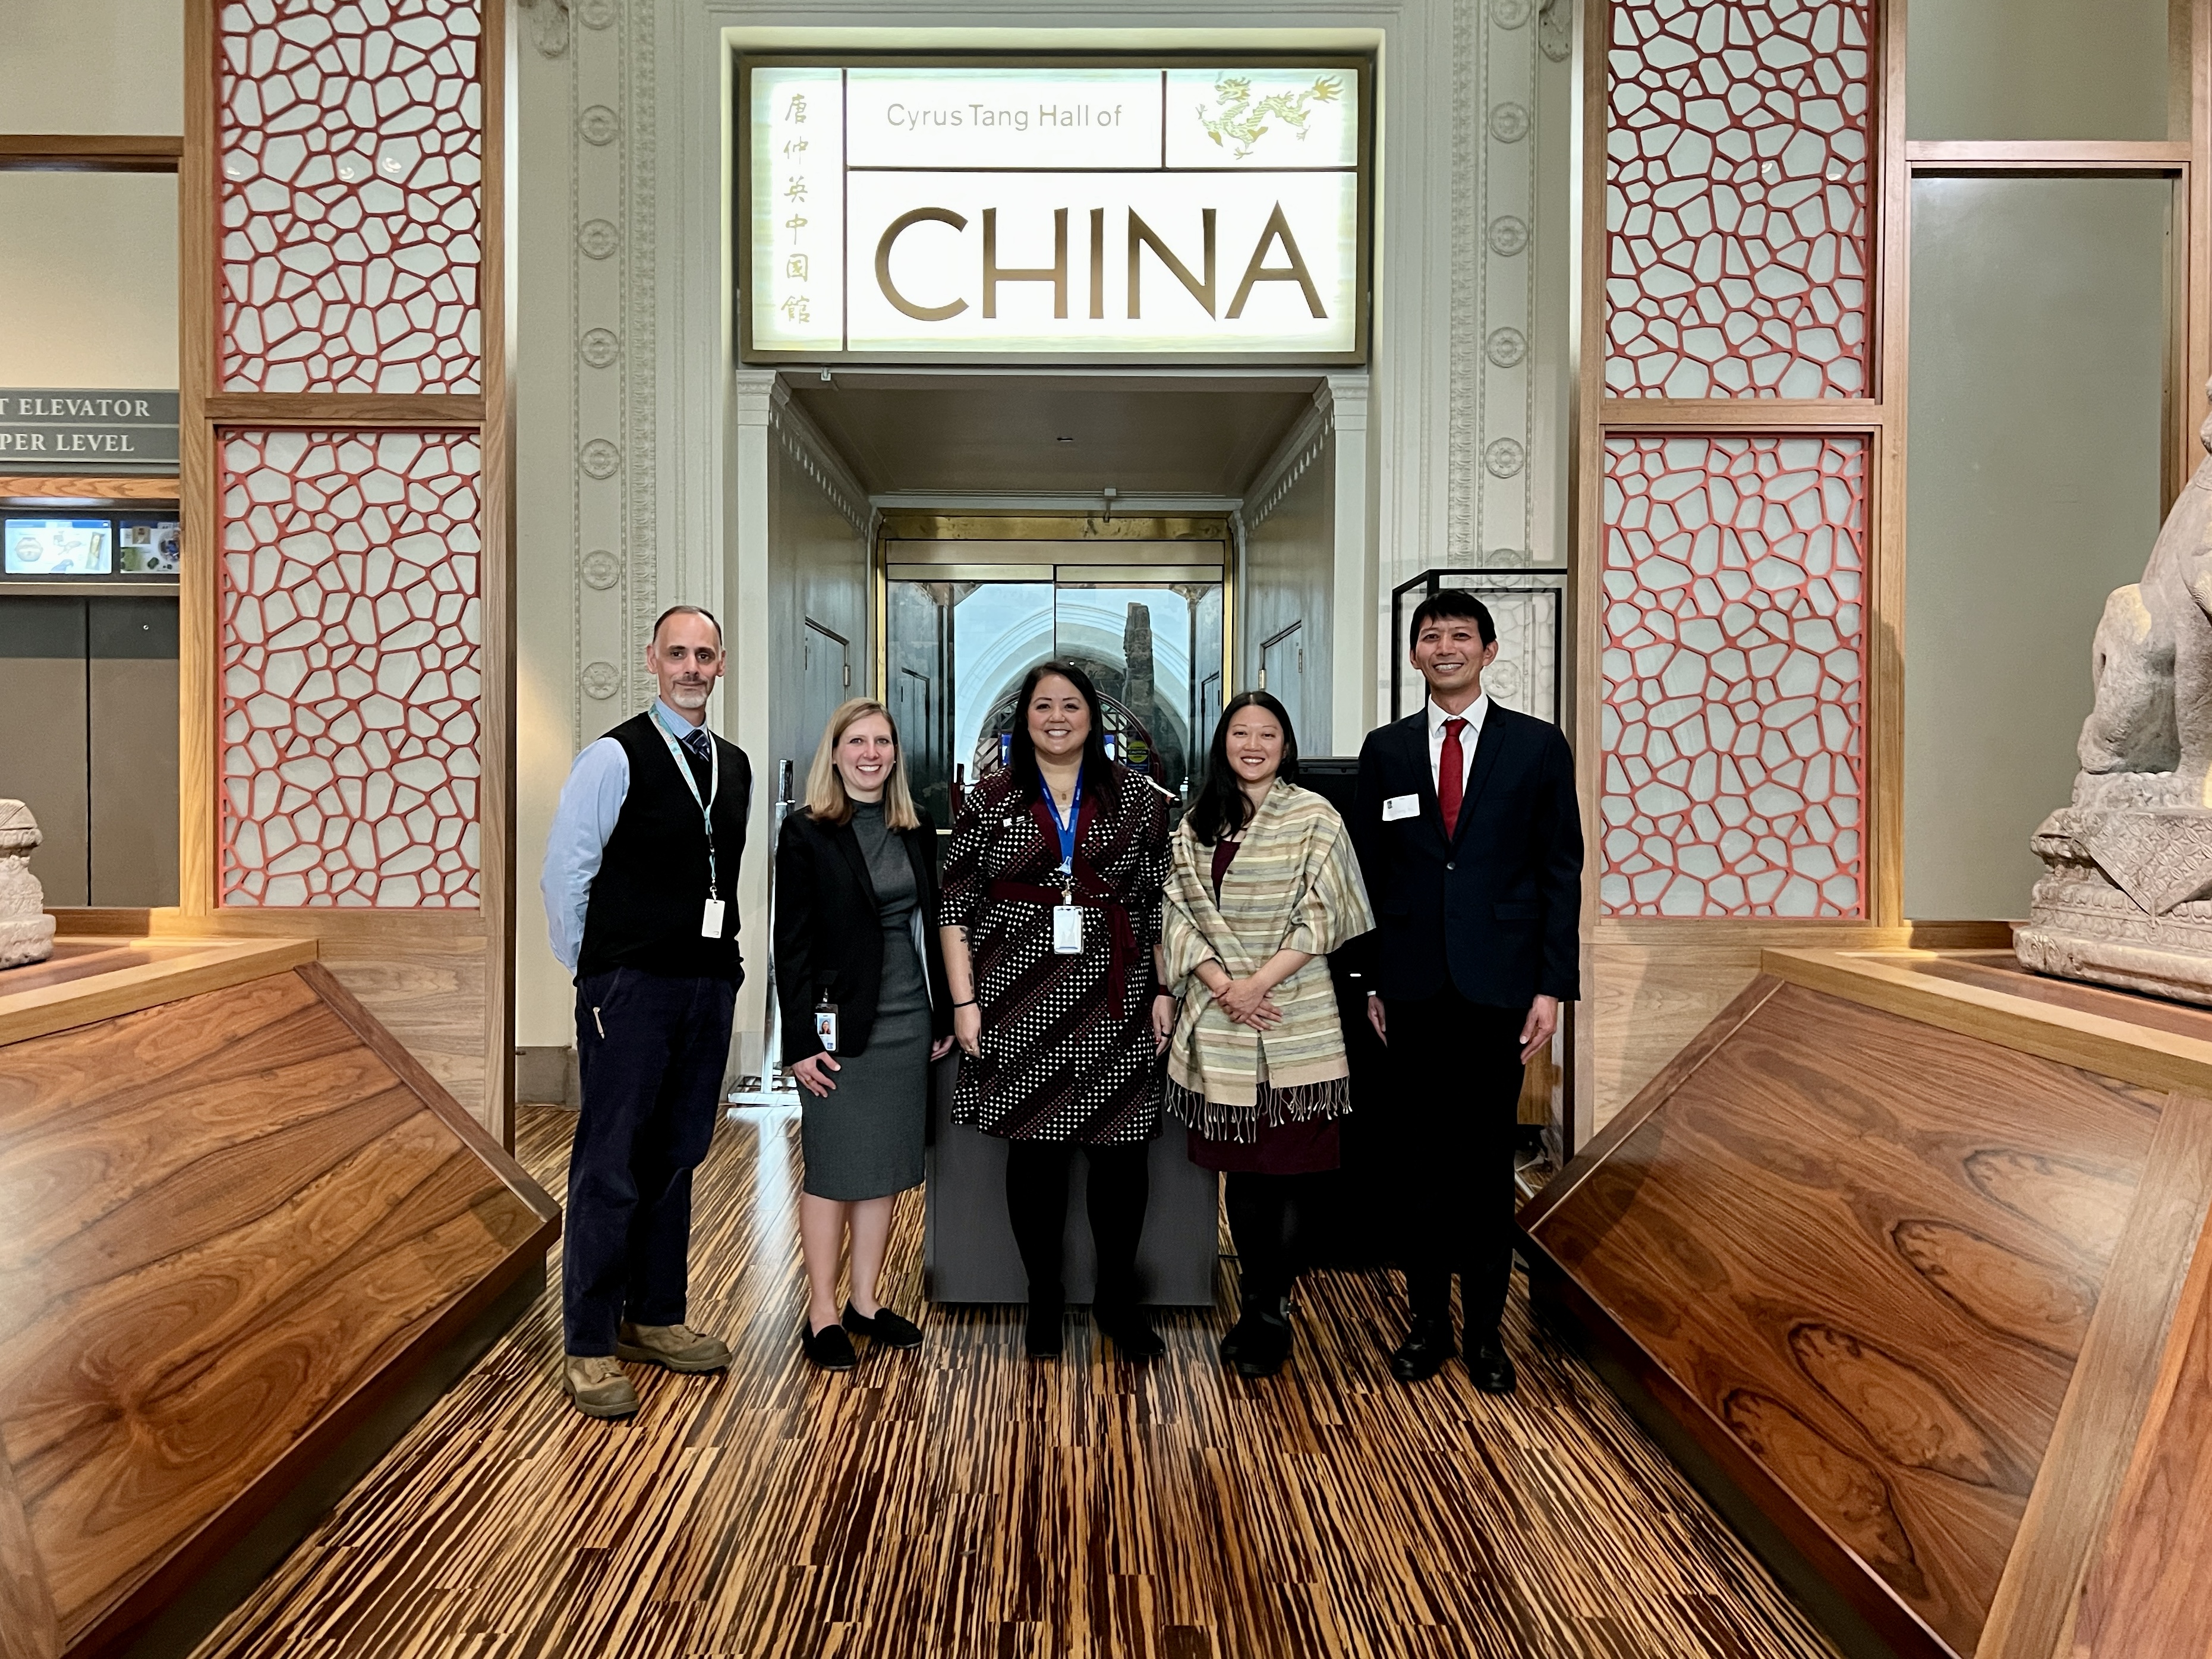 Five people stand next to each other at the entrance to an exhibition hall with a sign with the word China